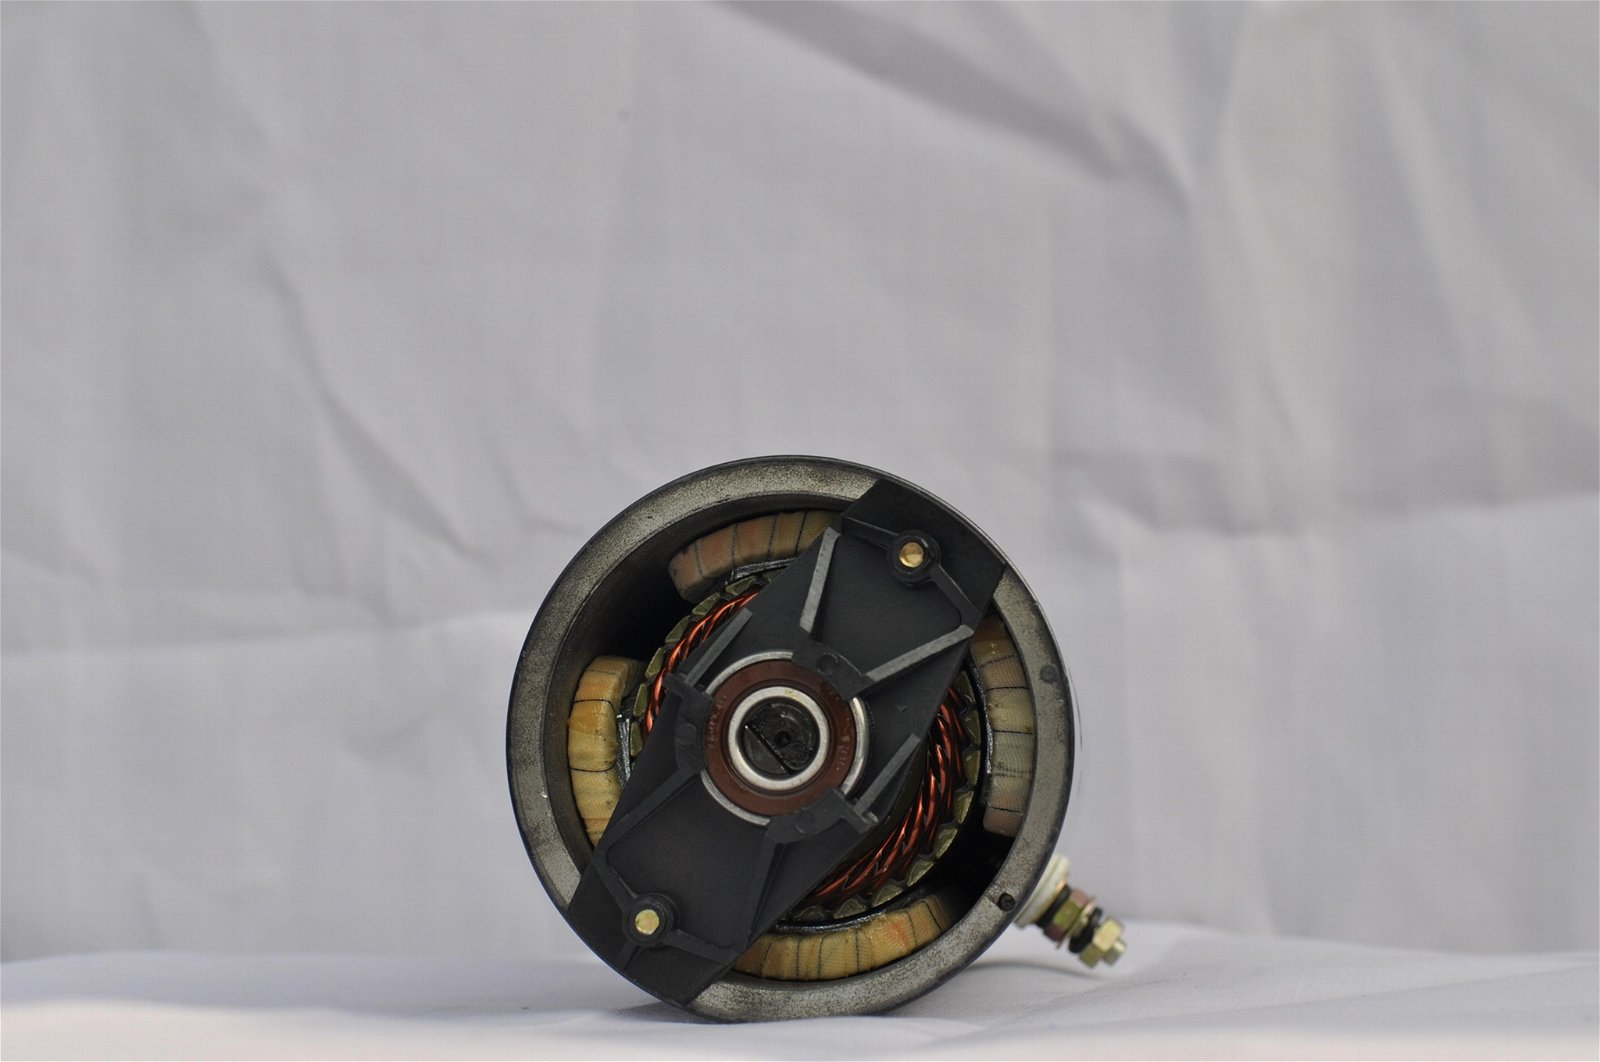 12V 1.6KW SERIES WOUND DOUBLE BALL BEARING DC MOTOR W-9993D 2